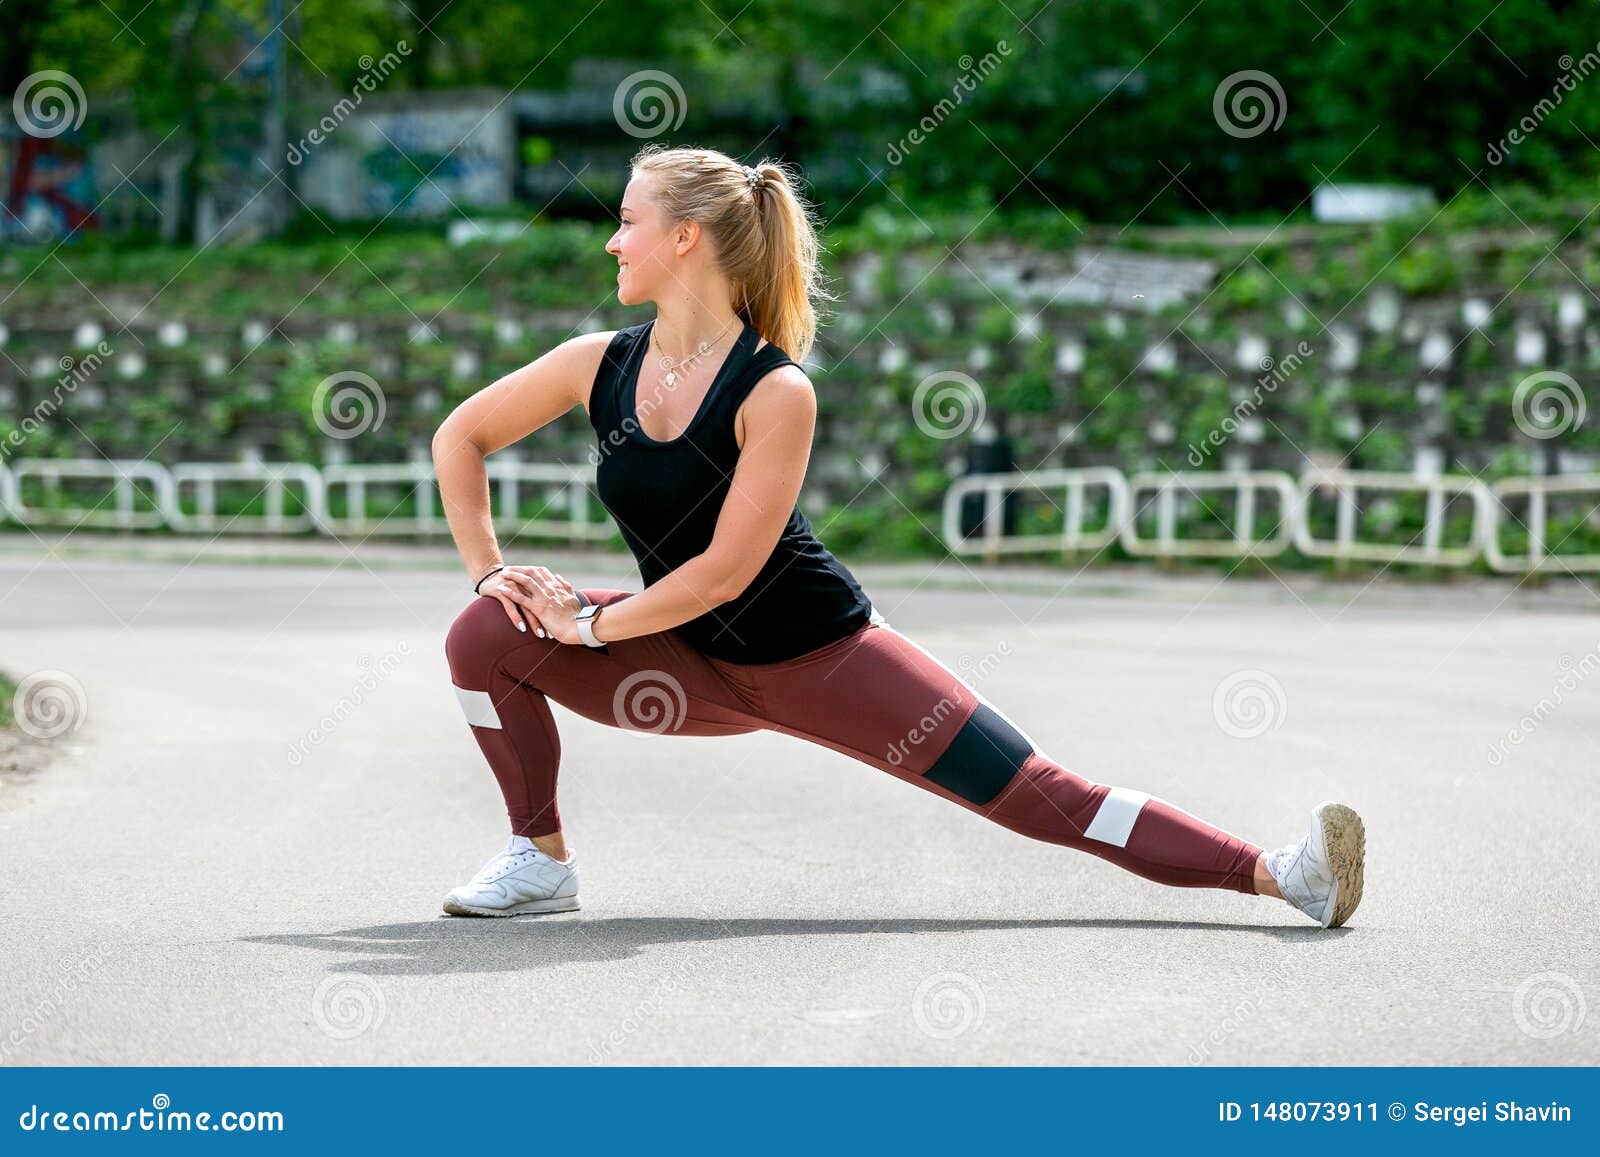 fitness lifestyle. young woman warming up before training doing exercises to stretch her muscles and joints. workout at the